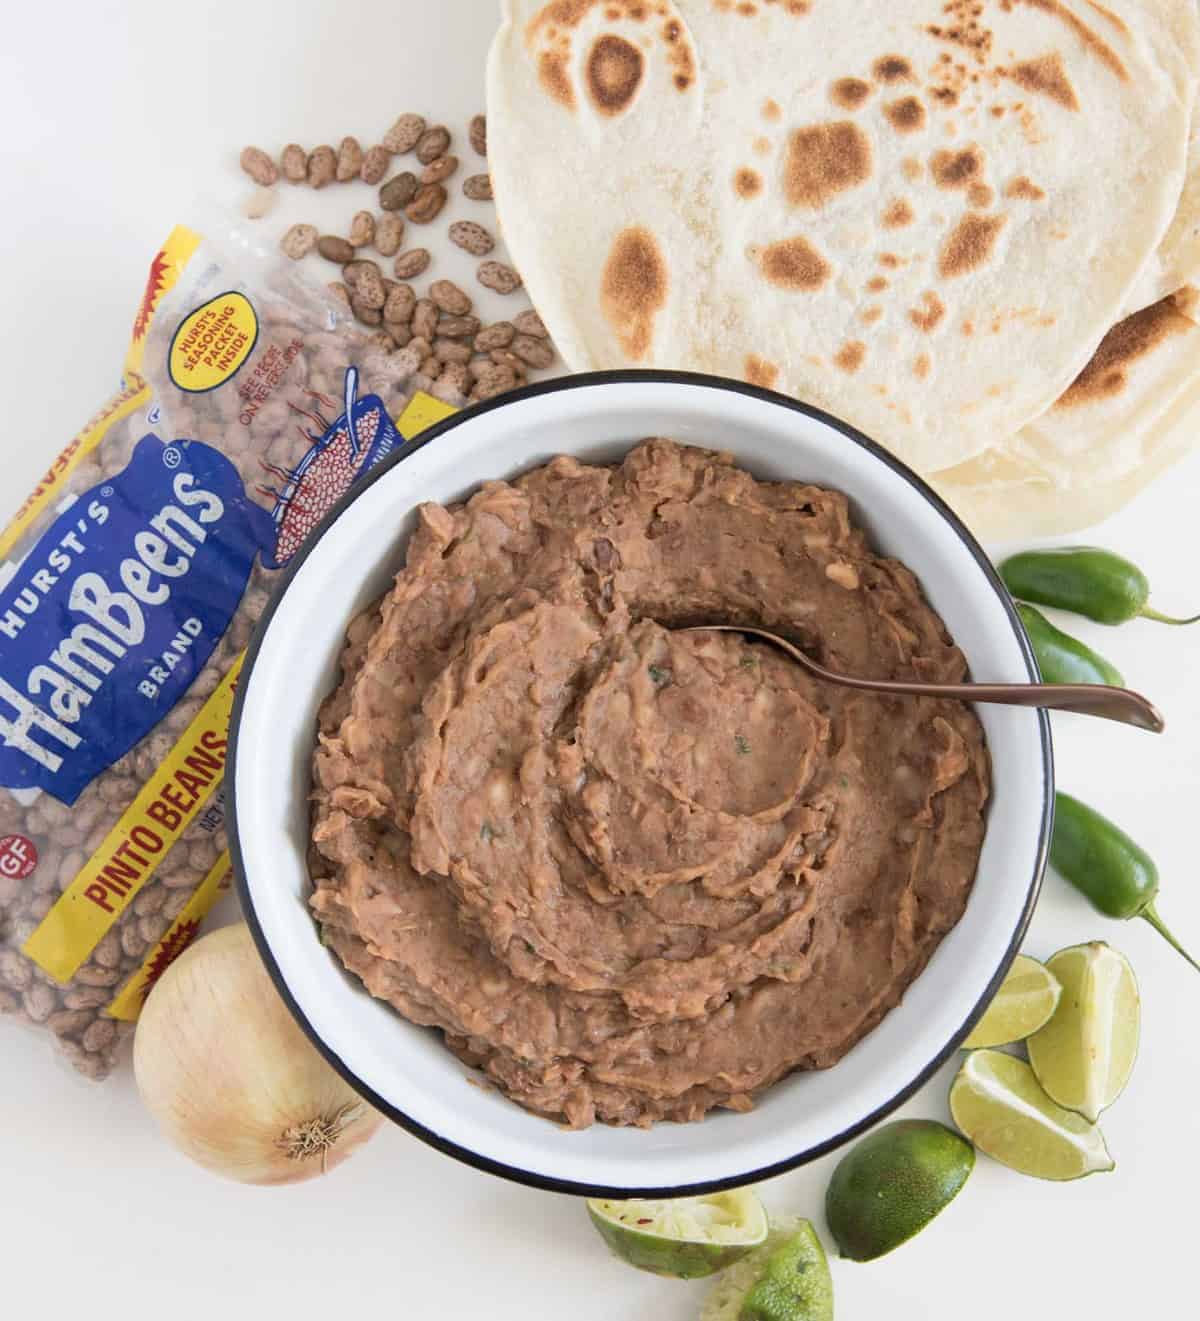 Slow cooker refried beans are the simplest way to make rich and hearty refried beans at home.